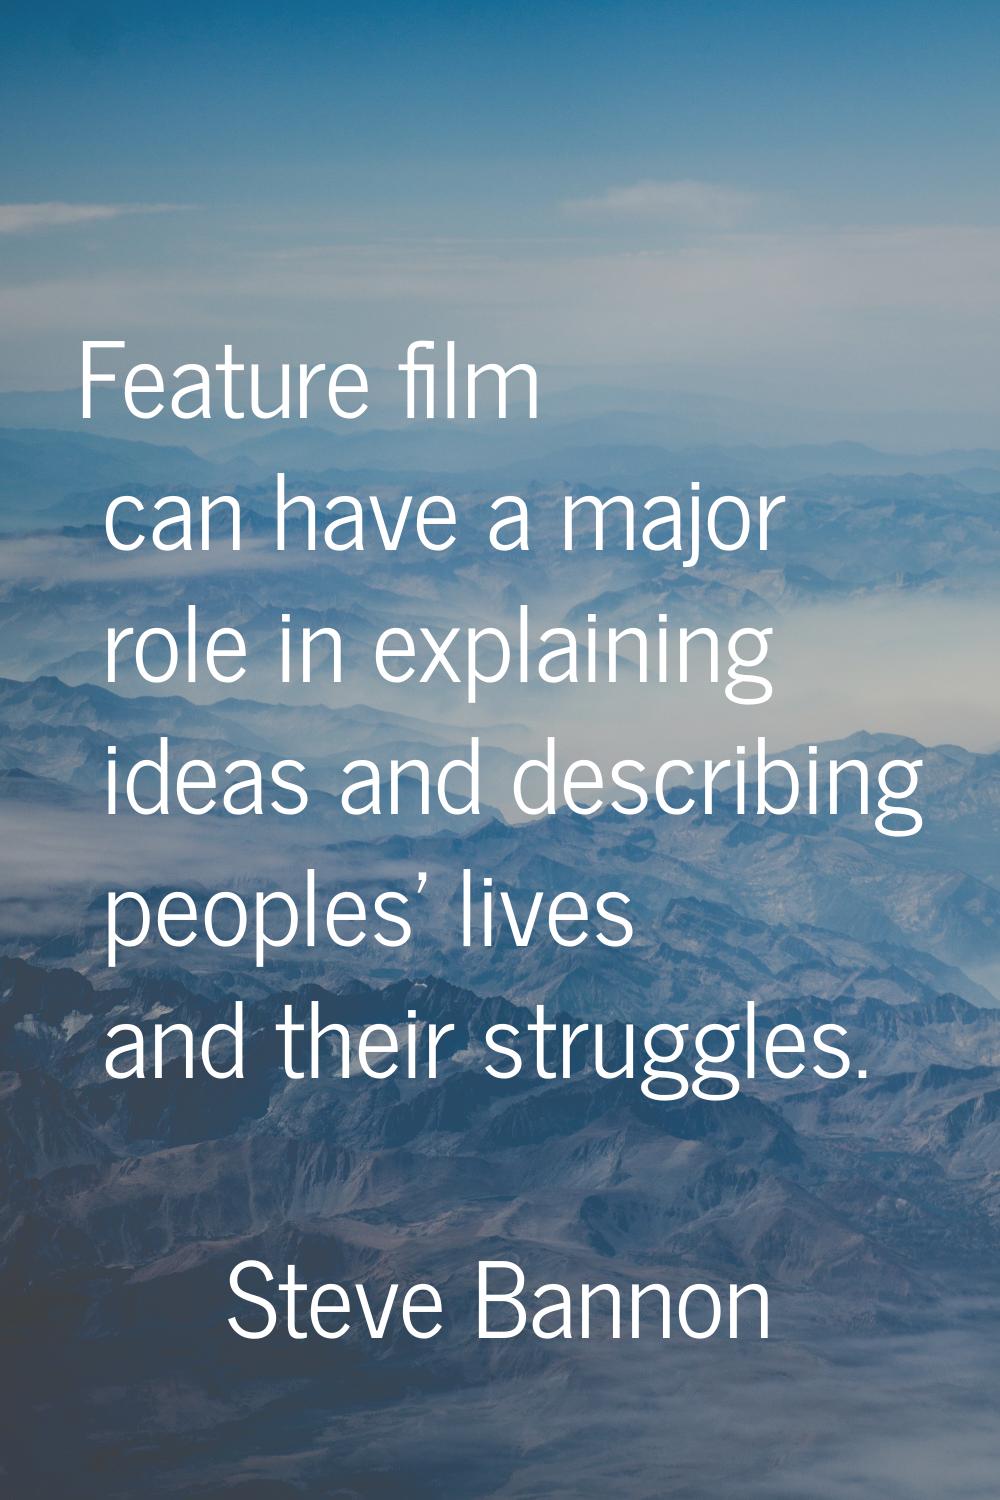 Feature film can have a major role in explaining ideas and describing peoples' lives and their stru